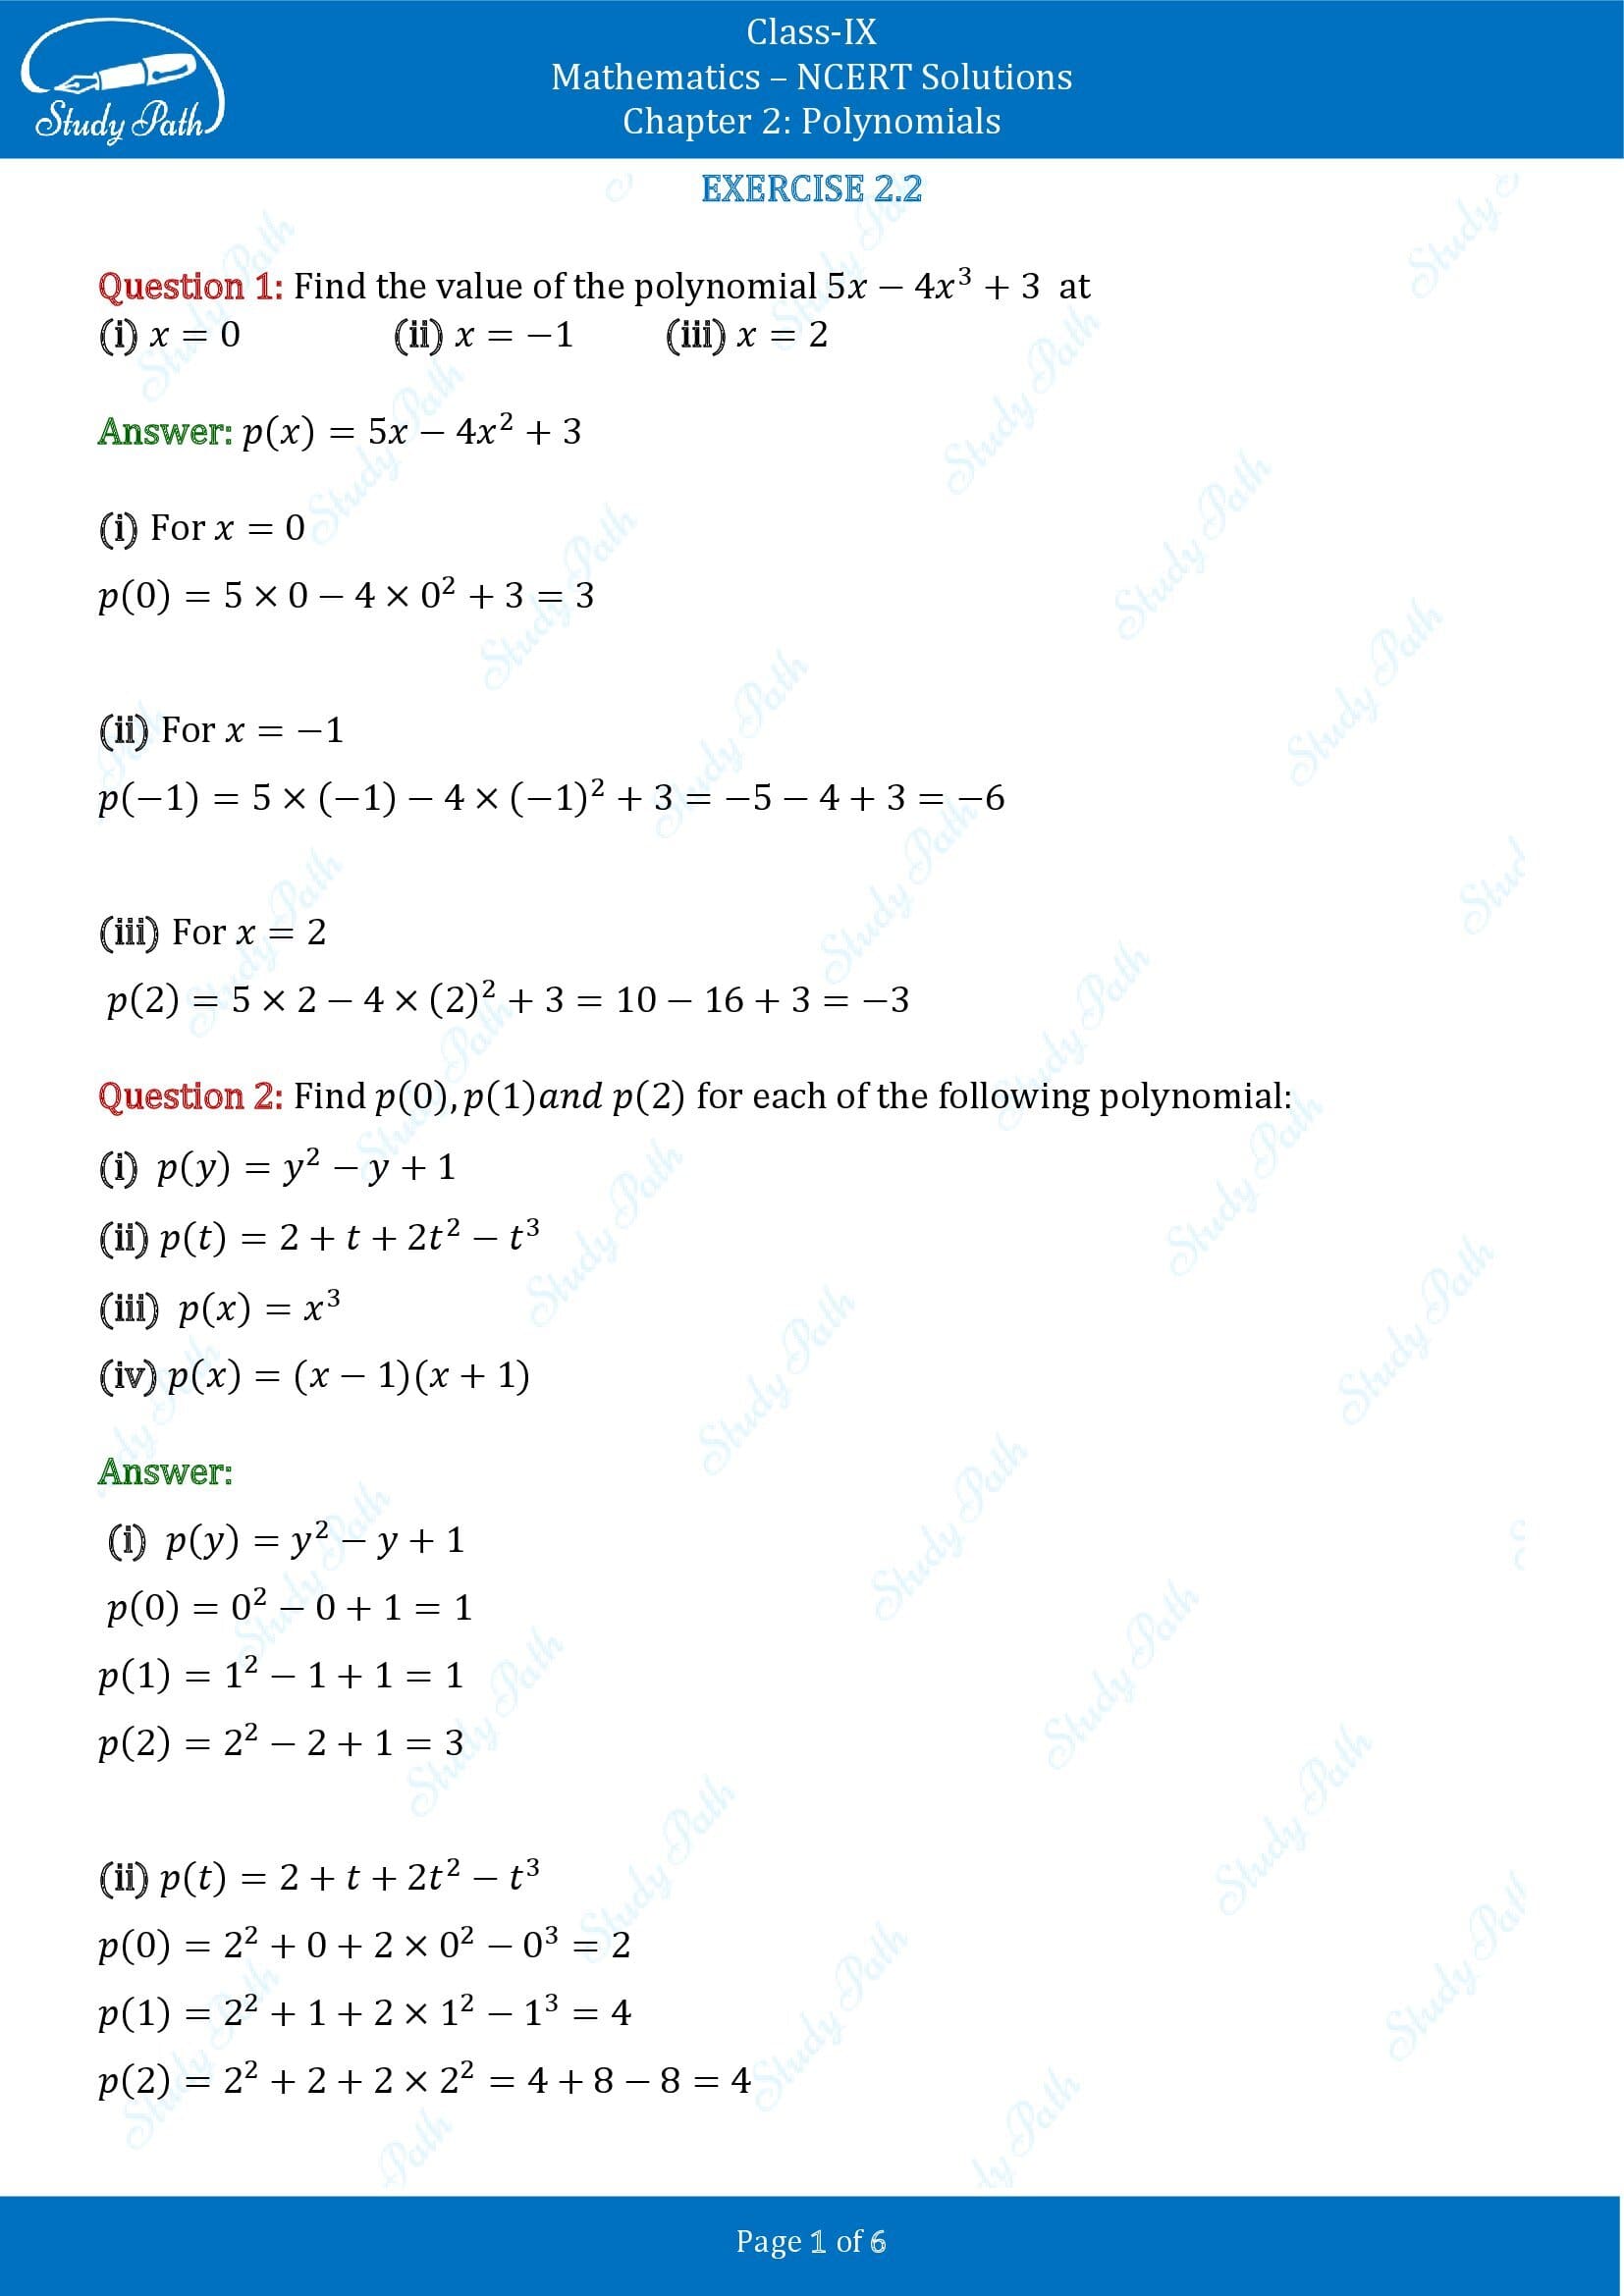 NCERT Solutions for Class 9 Maths Chapter 2 Polynomials Exercise 2.2 00001